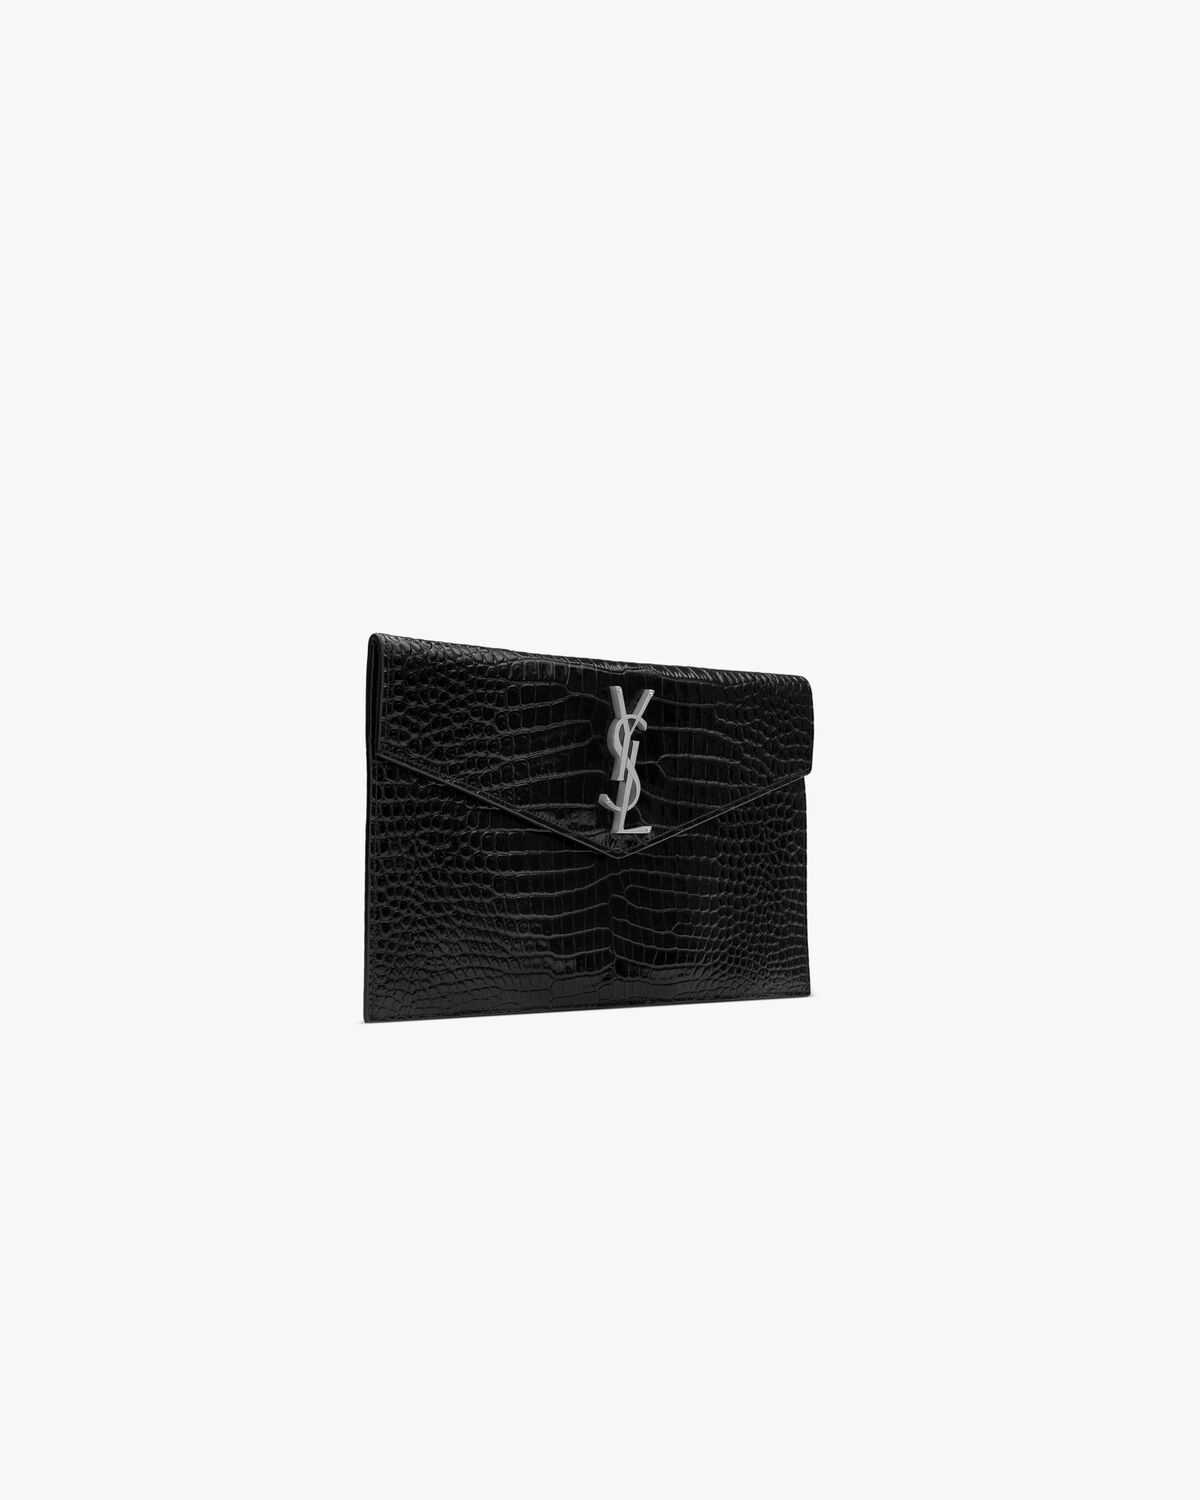 UPTOWN pouch in CROCODILE-EMBOSSED shiny leather